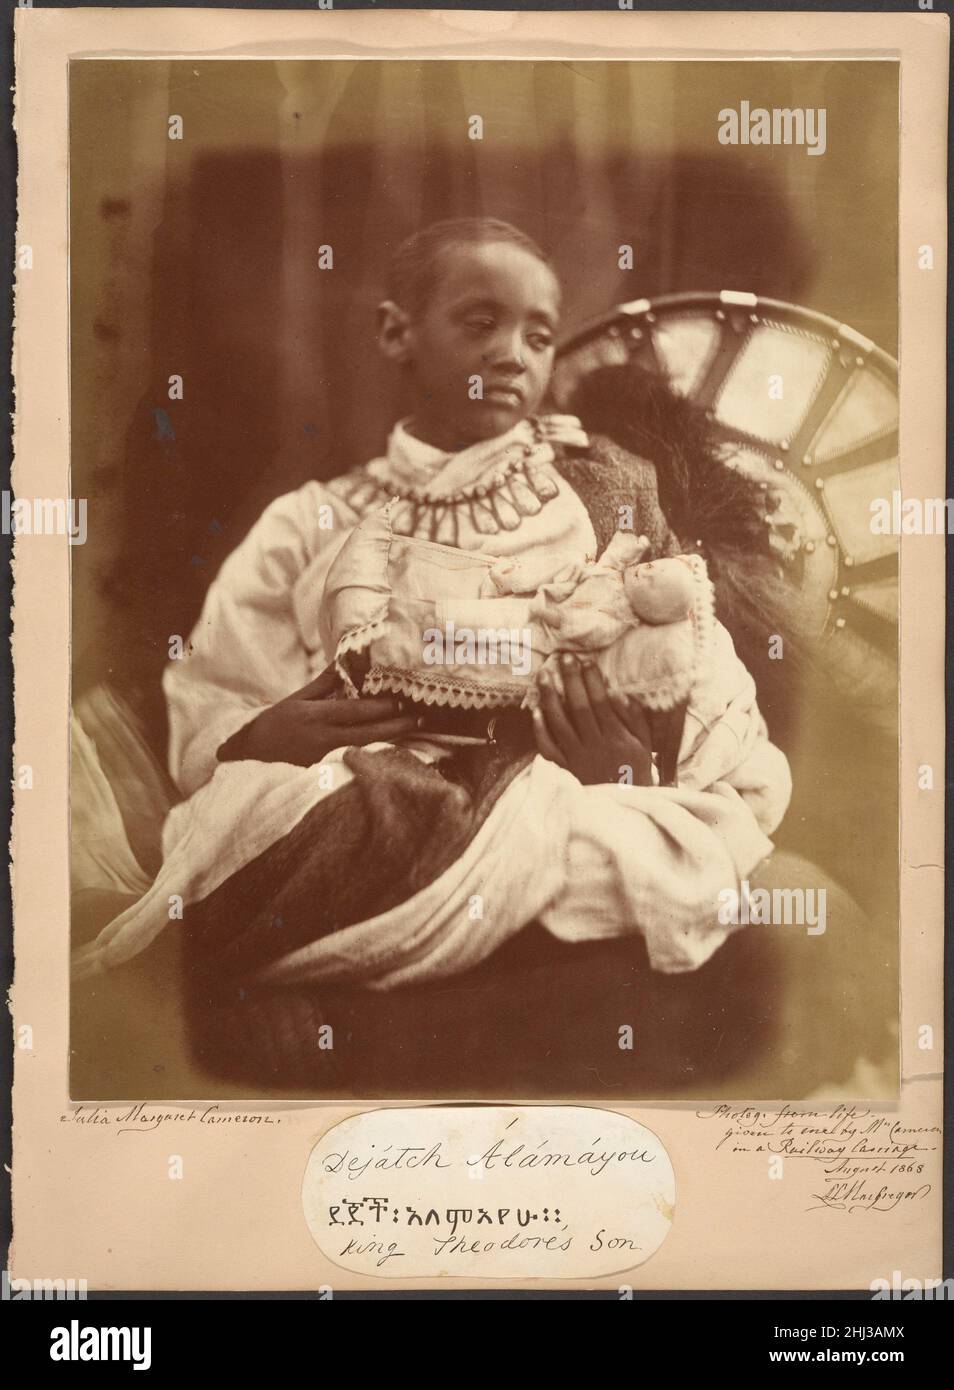 Déjatch Alámayou, King Theodore's Son July 1868 Julia Margaret Cameron British, born India Déjatch Alámayou was taken to England after the British defeat of the Ethiopians at the battle of Magdala and the suicide of his father, Tewodros (Theodore) II, emperor of Ethiopia, in April 1868. Queen Victoria took an interest in Alámayou and saw to his education and protection, placing him in the care of Captain Tristram Speedy, who, like Cameron, had a home on the Isle of Wight. Speedy brought the child to Cameron’s house shortly after his arrival in England, and Cameron made ten photographs of the c Stock Photo